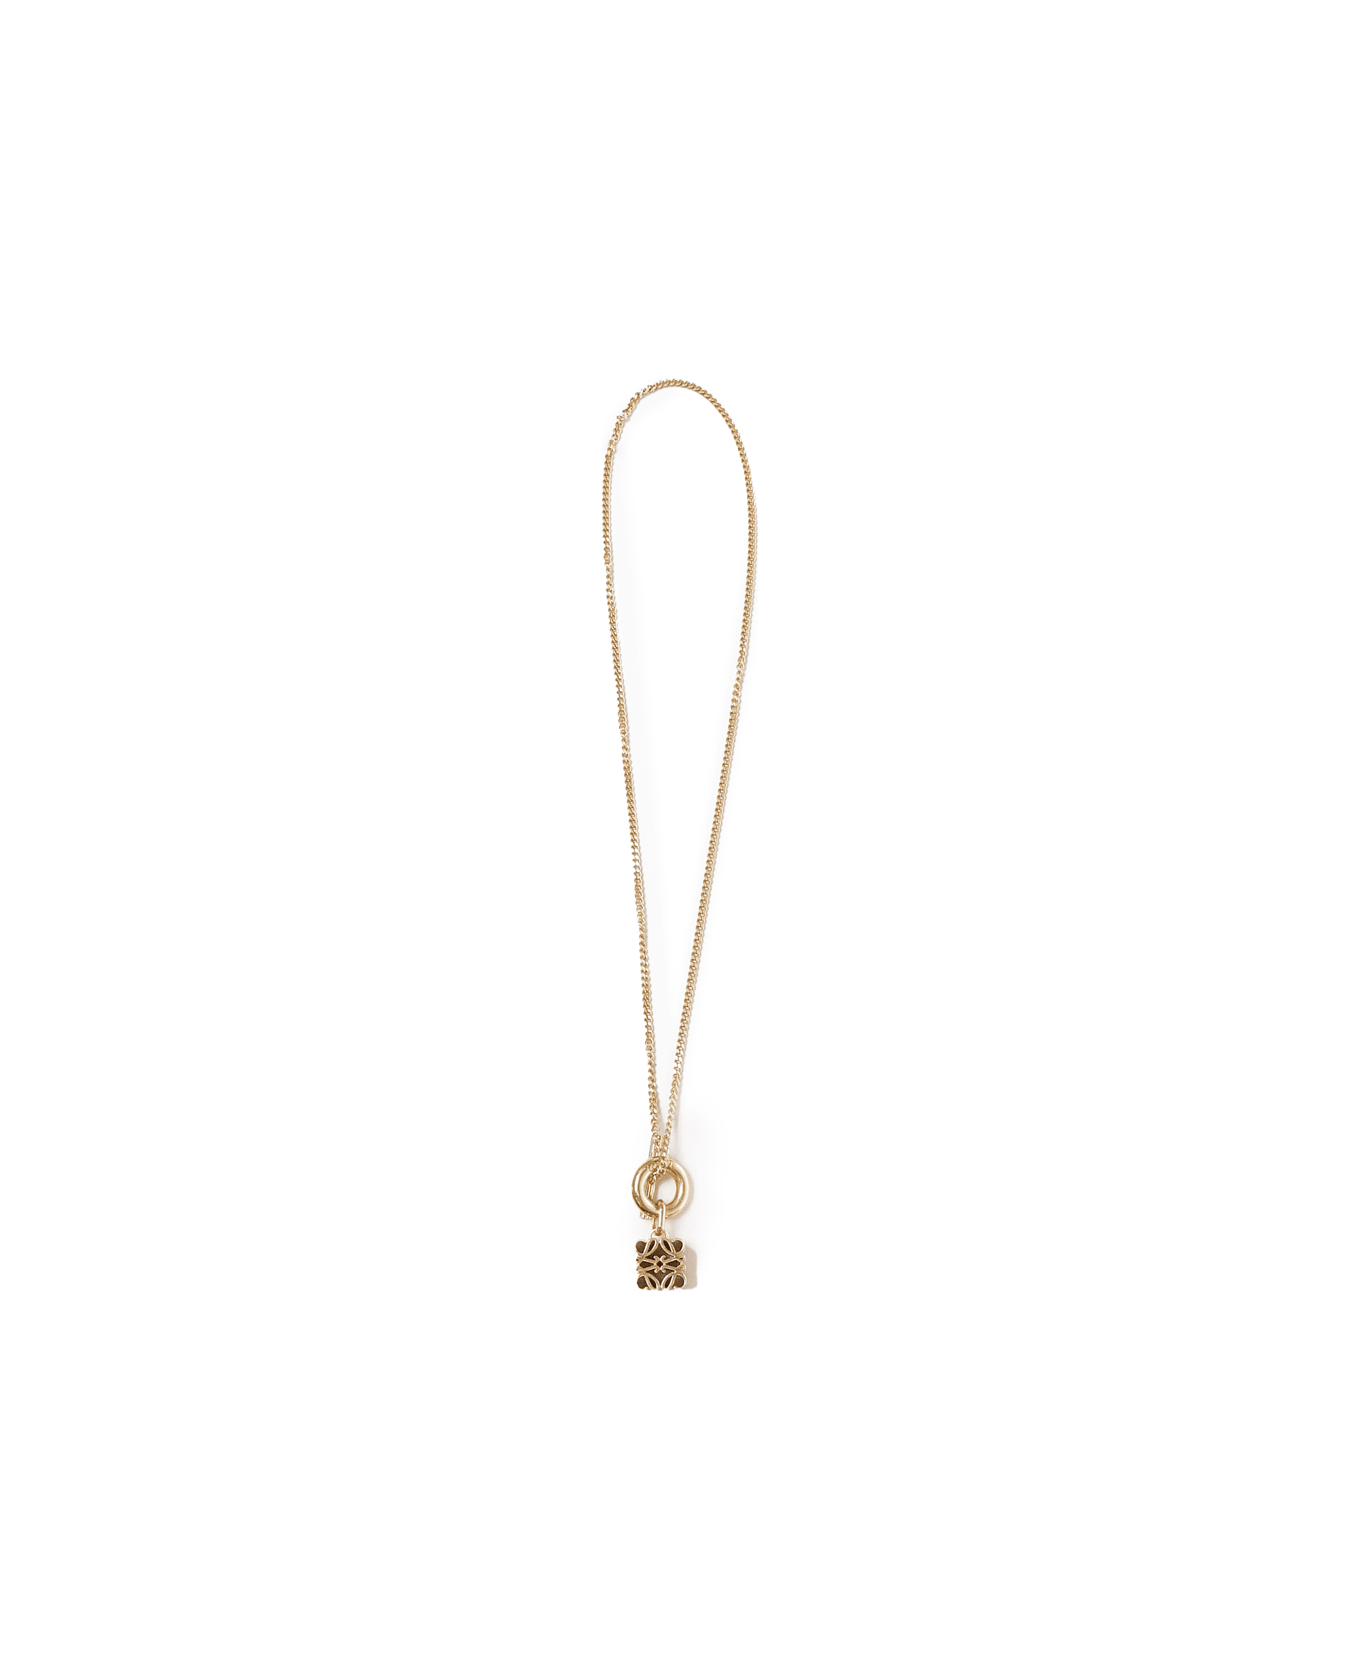 Loewe Anagram Pendant Necklace - Gold ネックレス